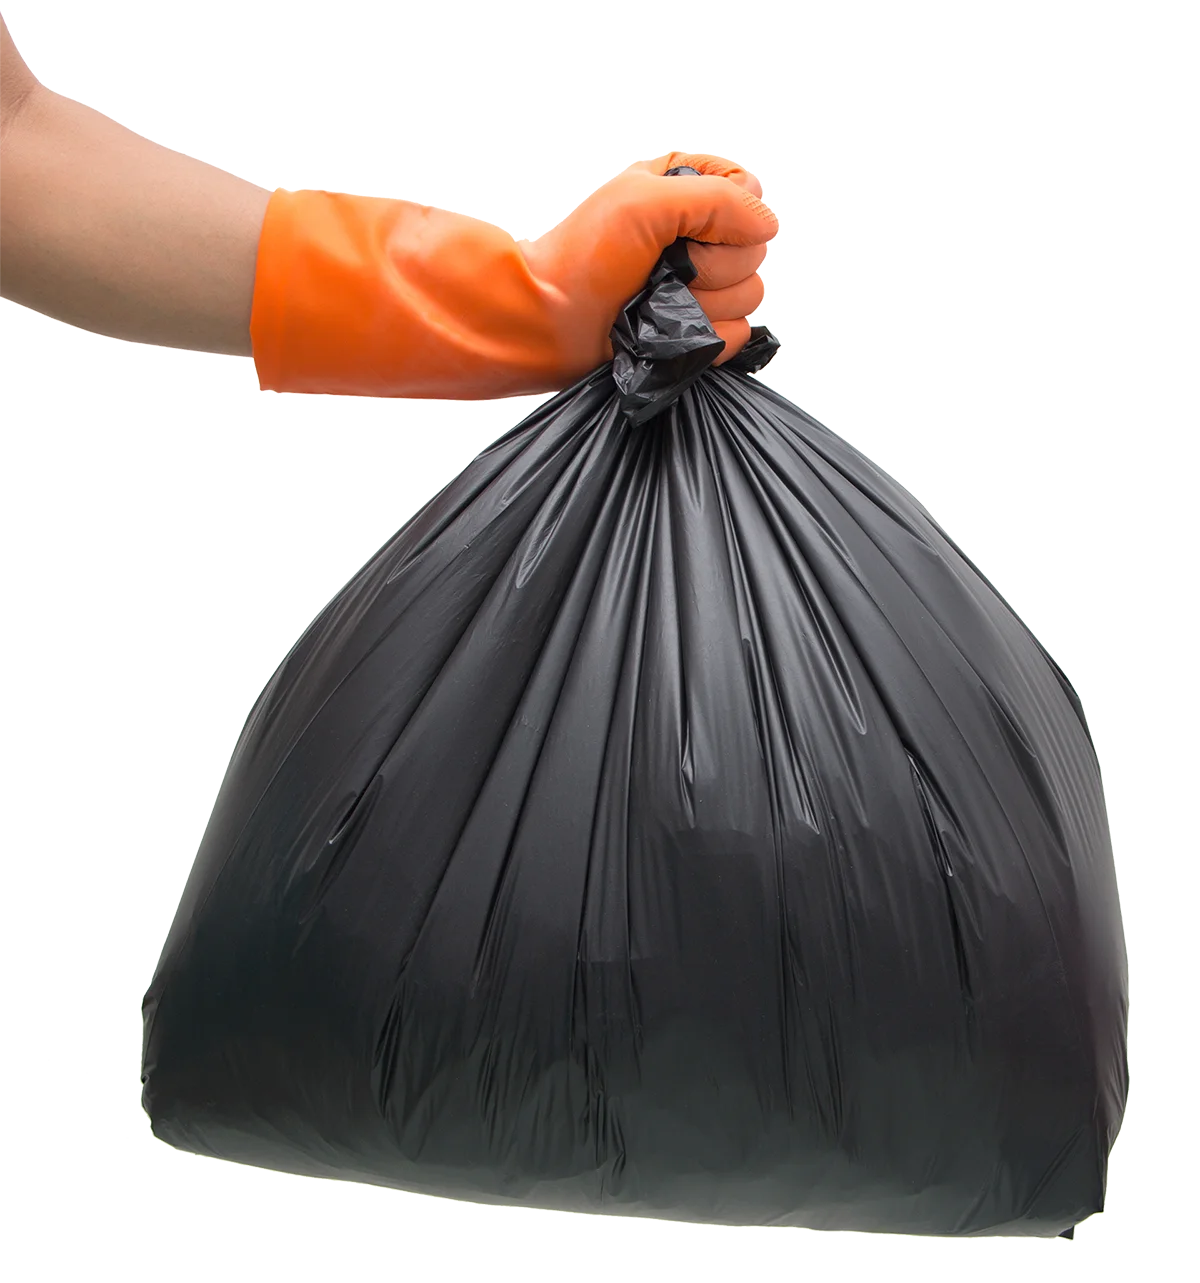 You can count on Residential Waste Service to provide industry leading door to door trash pickup services.